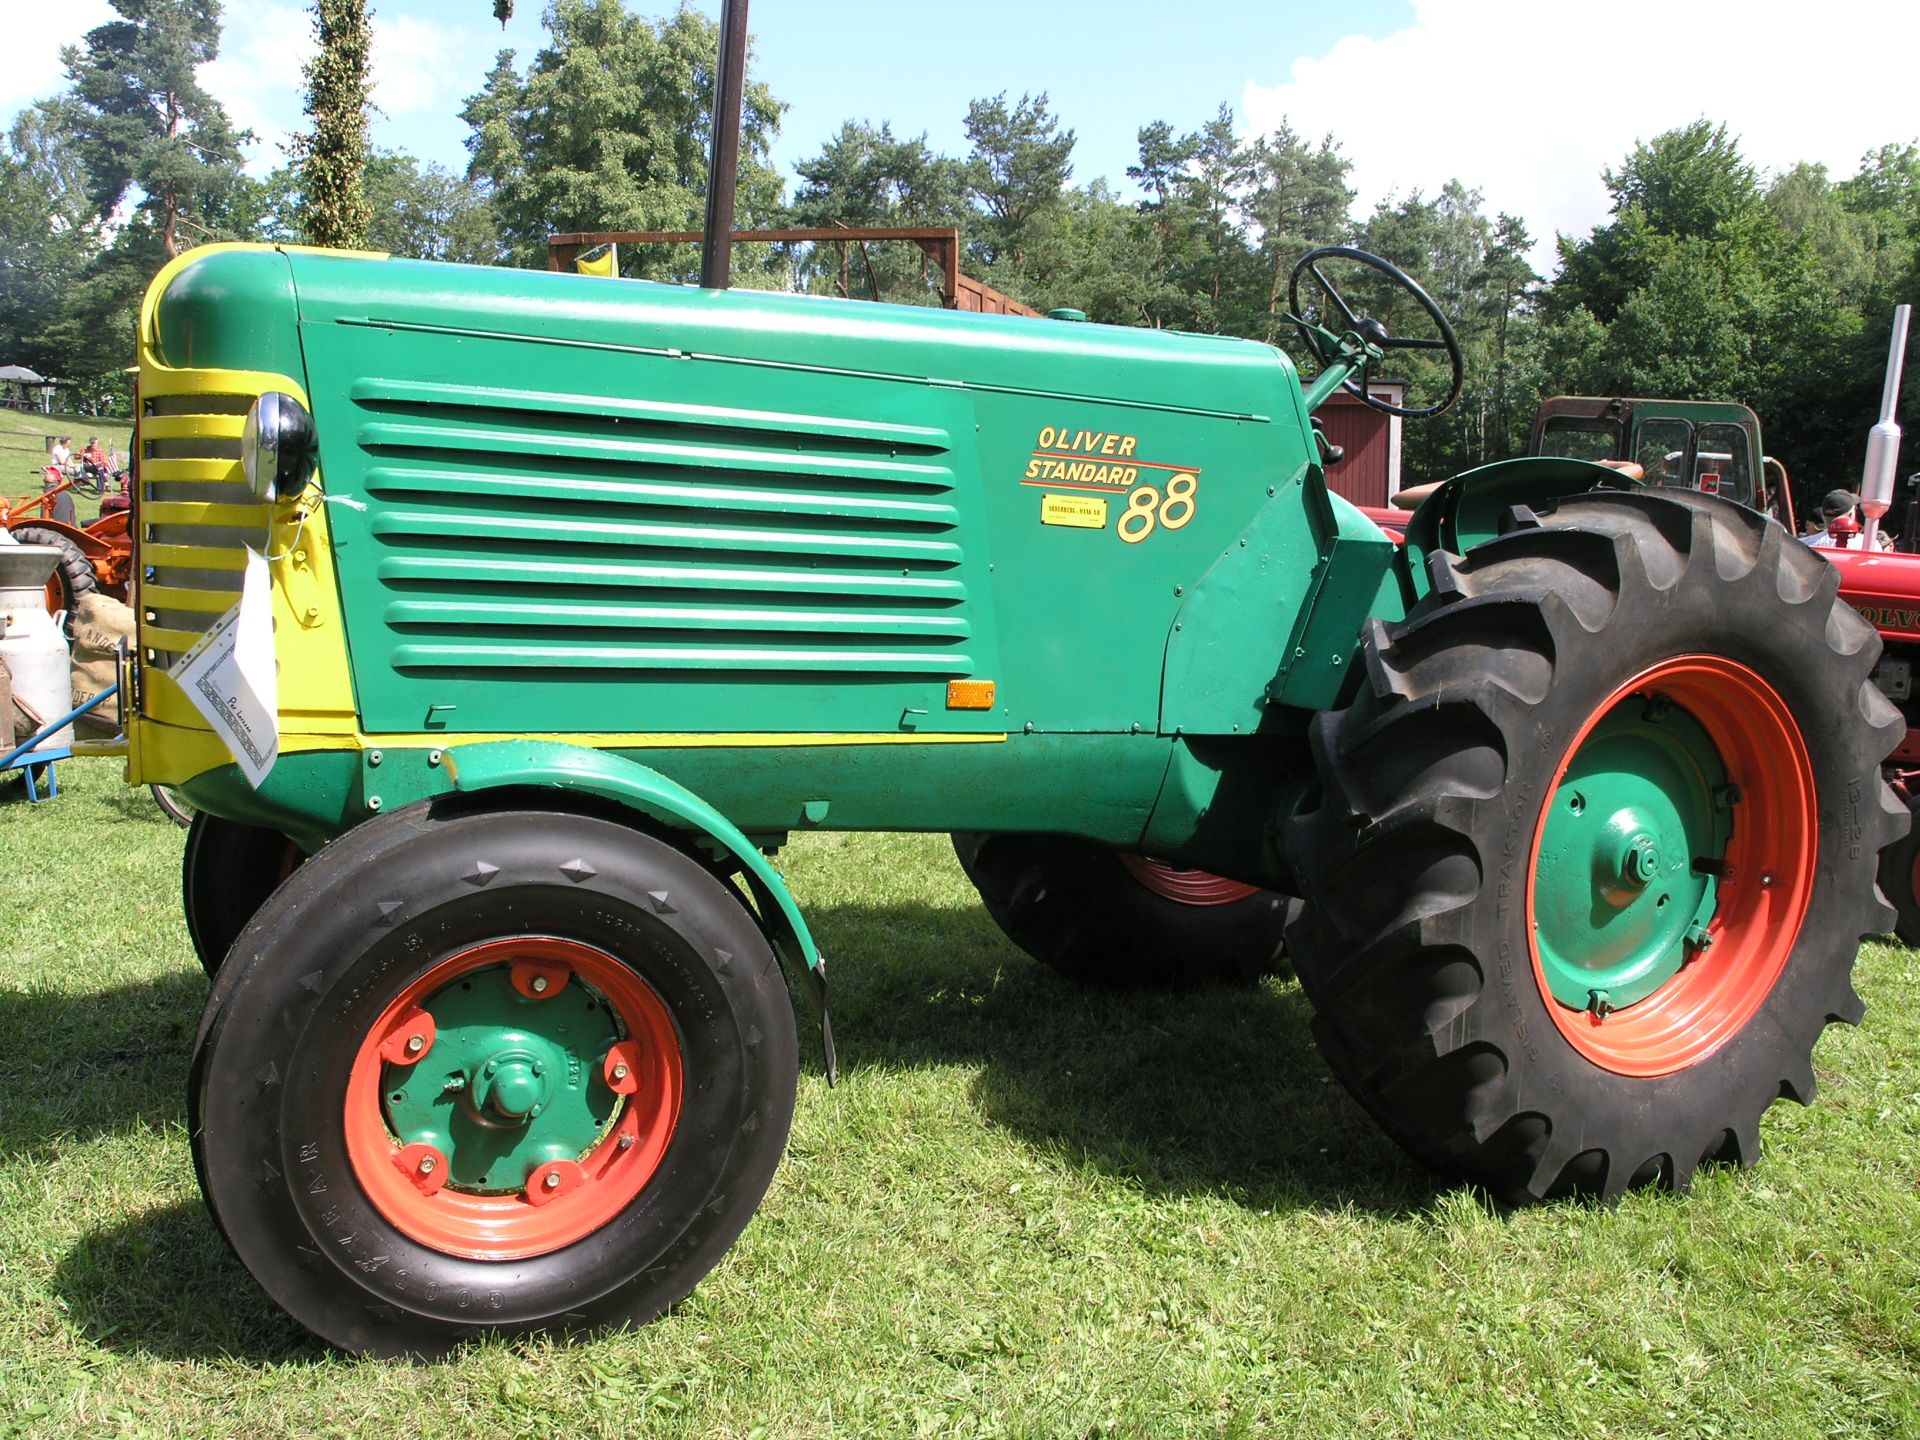 Top Oliver Tractor Wallpaper